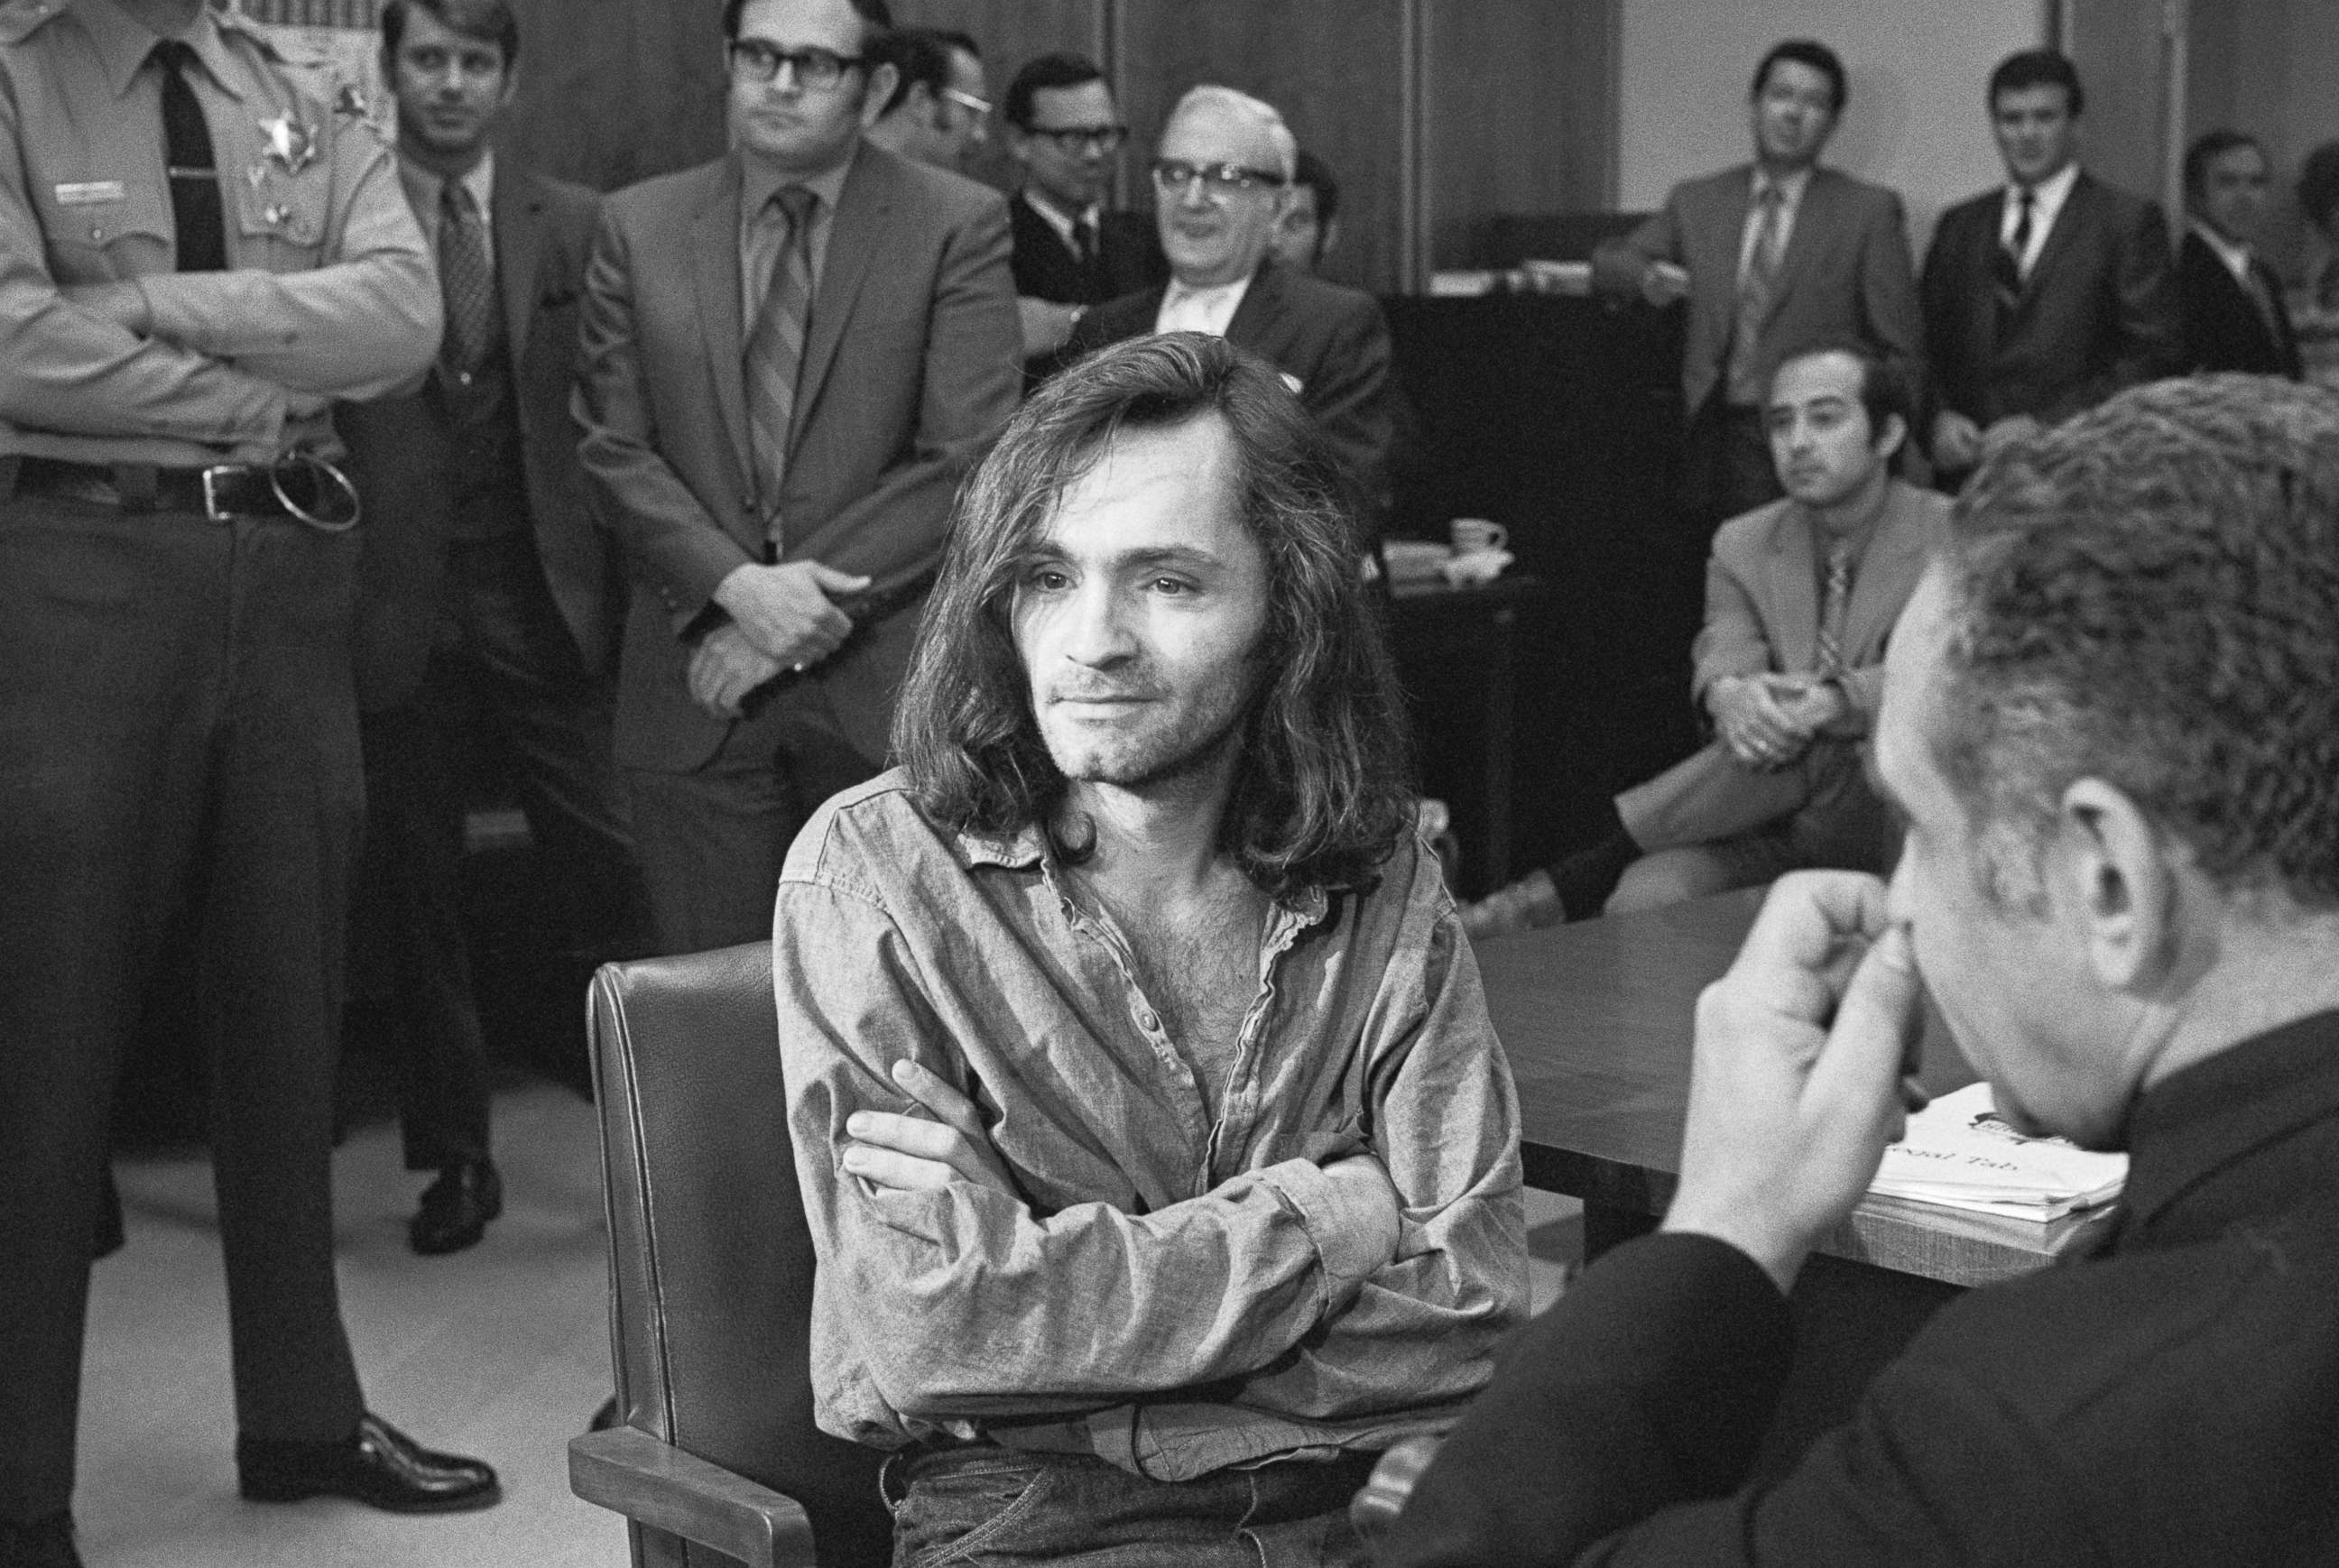 PHOTO: "I Don't Have Any Guilt" said long-haired hippie chieftain Charles Manson, 35, in brief press conference in courtroom here, June 18, 1970, where a hearing to continue proceedings in the murder case of musician Dary Hinman was held.